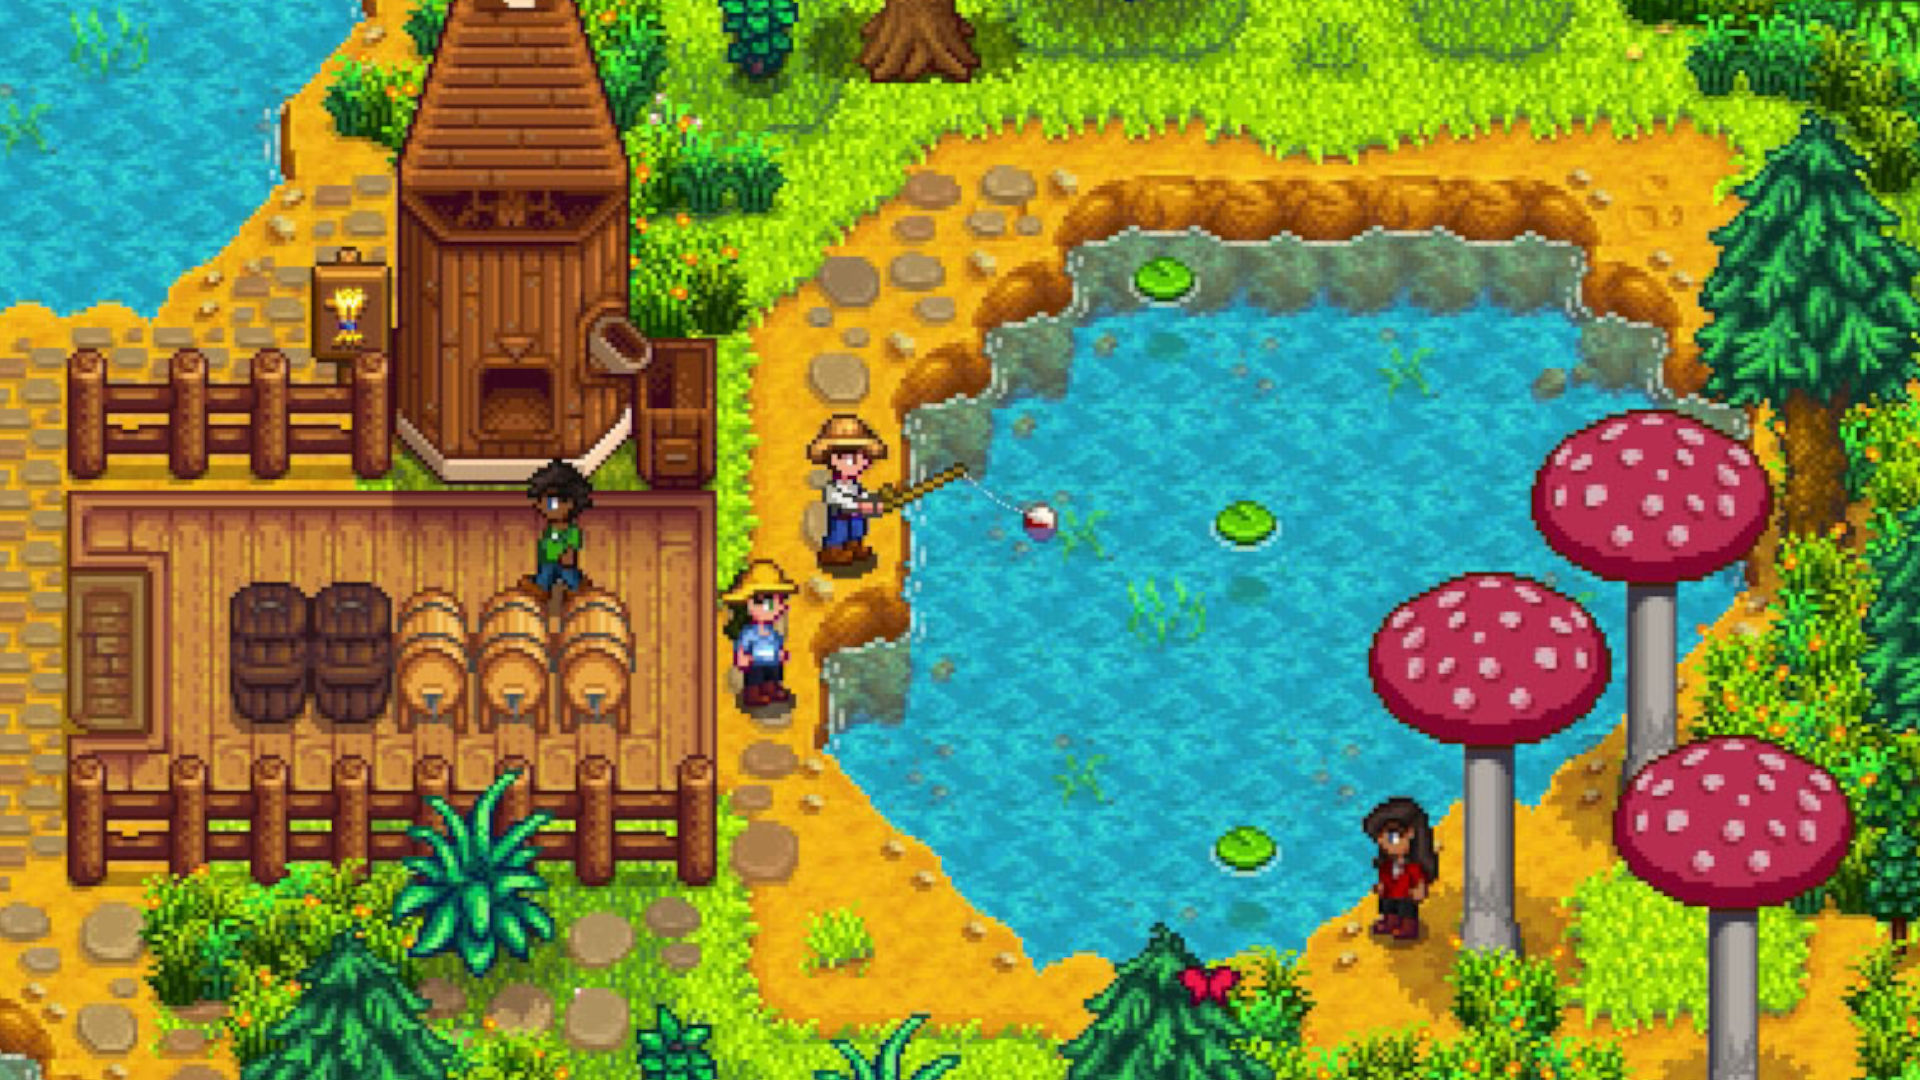 Stardew Valley review: A home away from home